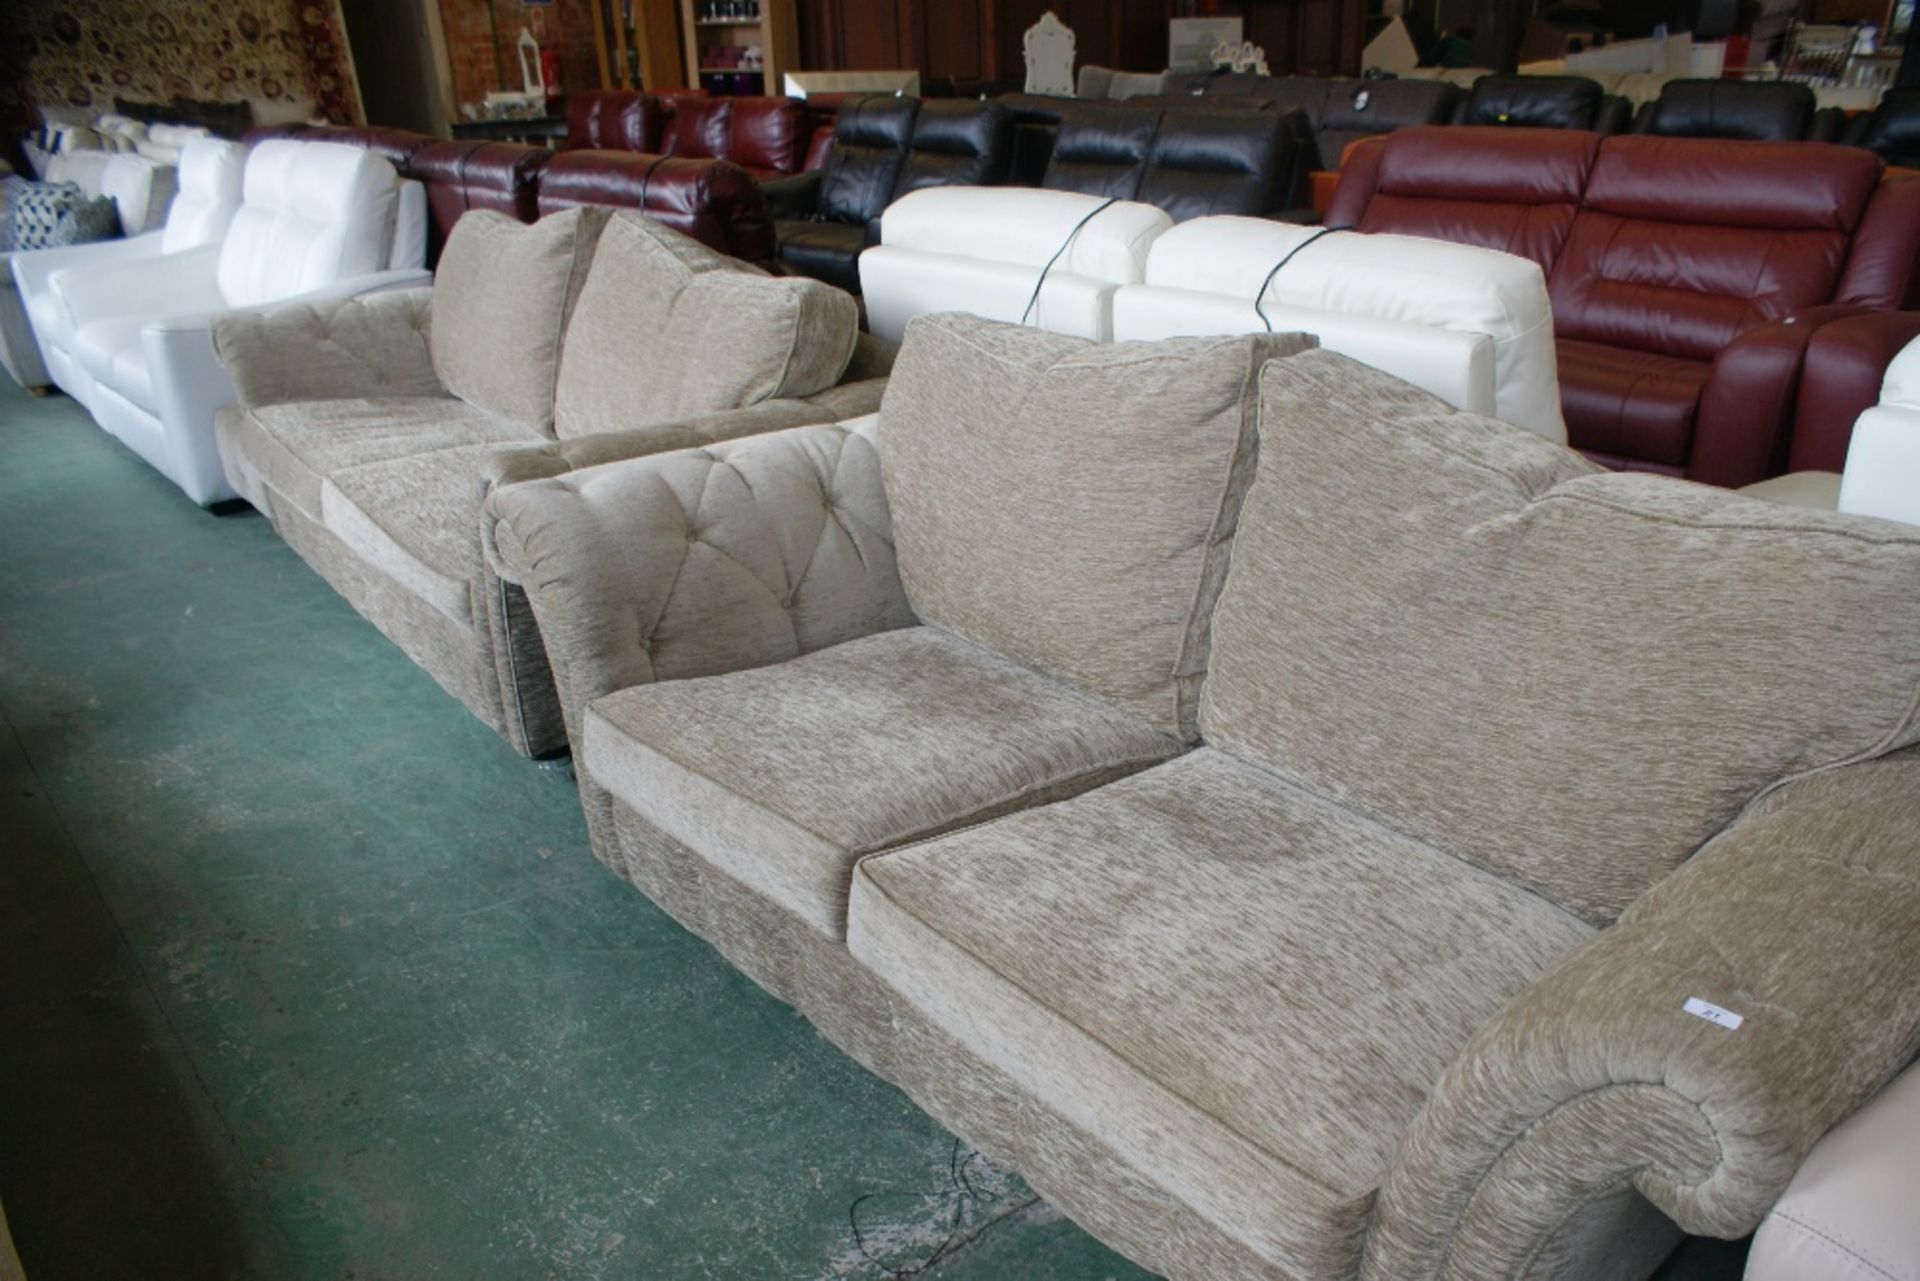 ELLIOT BEIGE BUTTON 3 SEATER SOFA, 2 SEATER SOFA AND FOOT STOOL